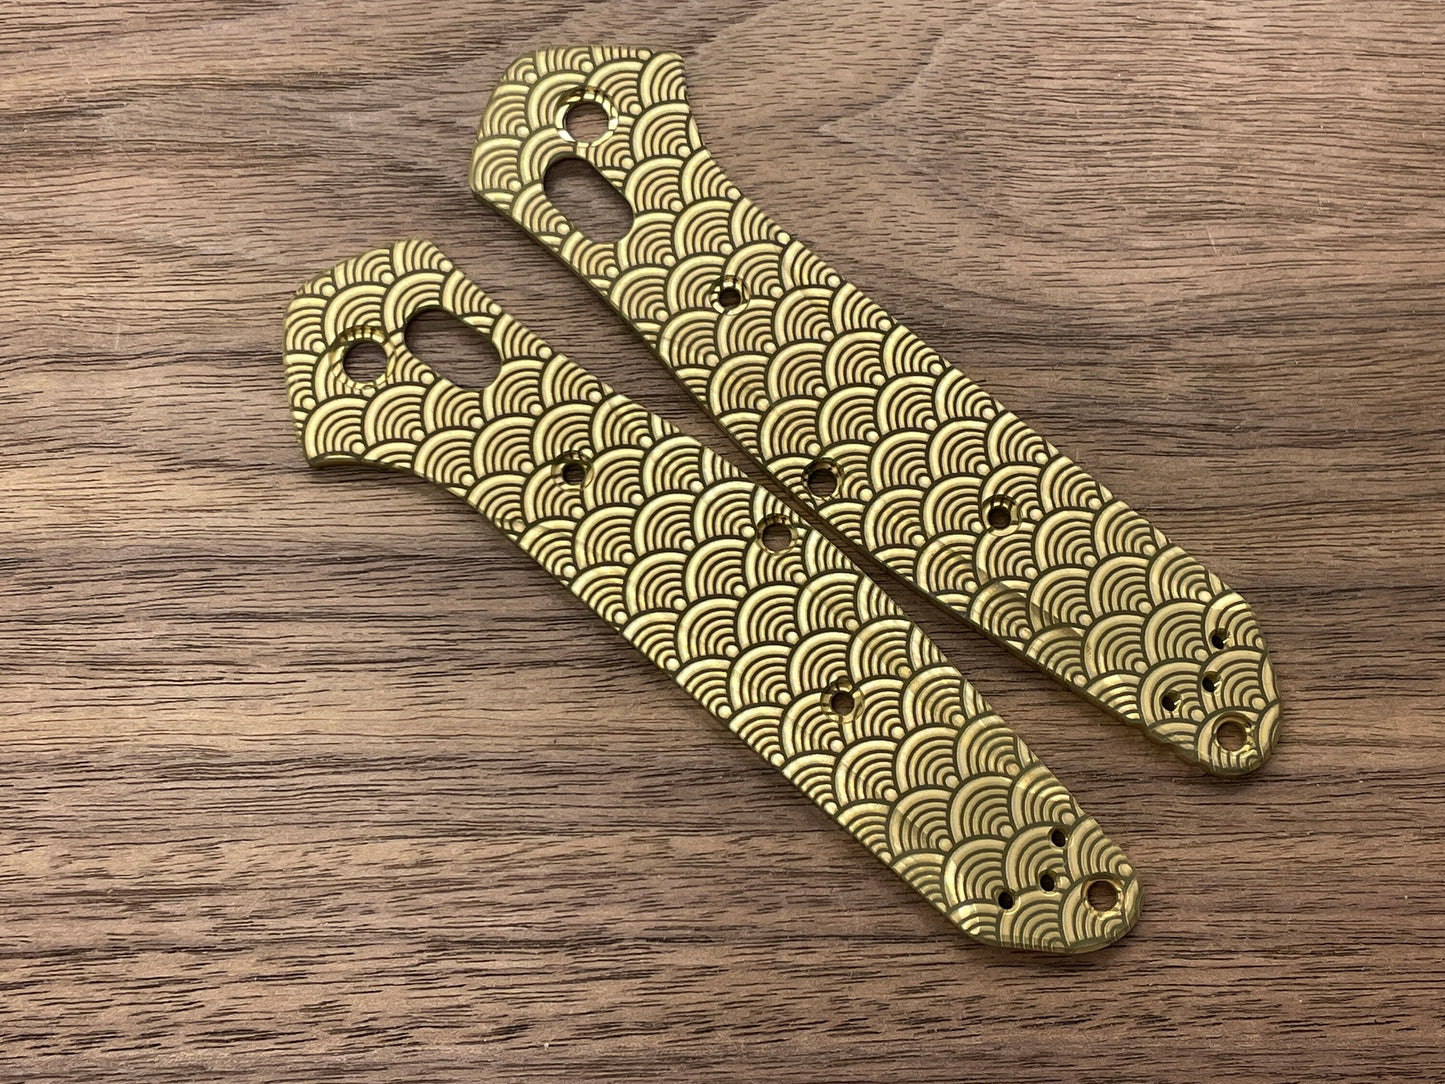 SEIGAIHA Brass Scales for Benchmade 940 Osborne